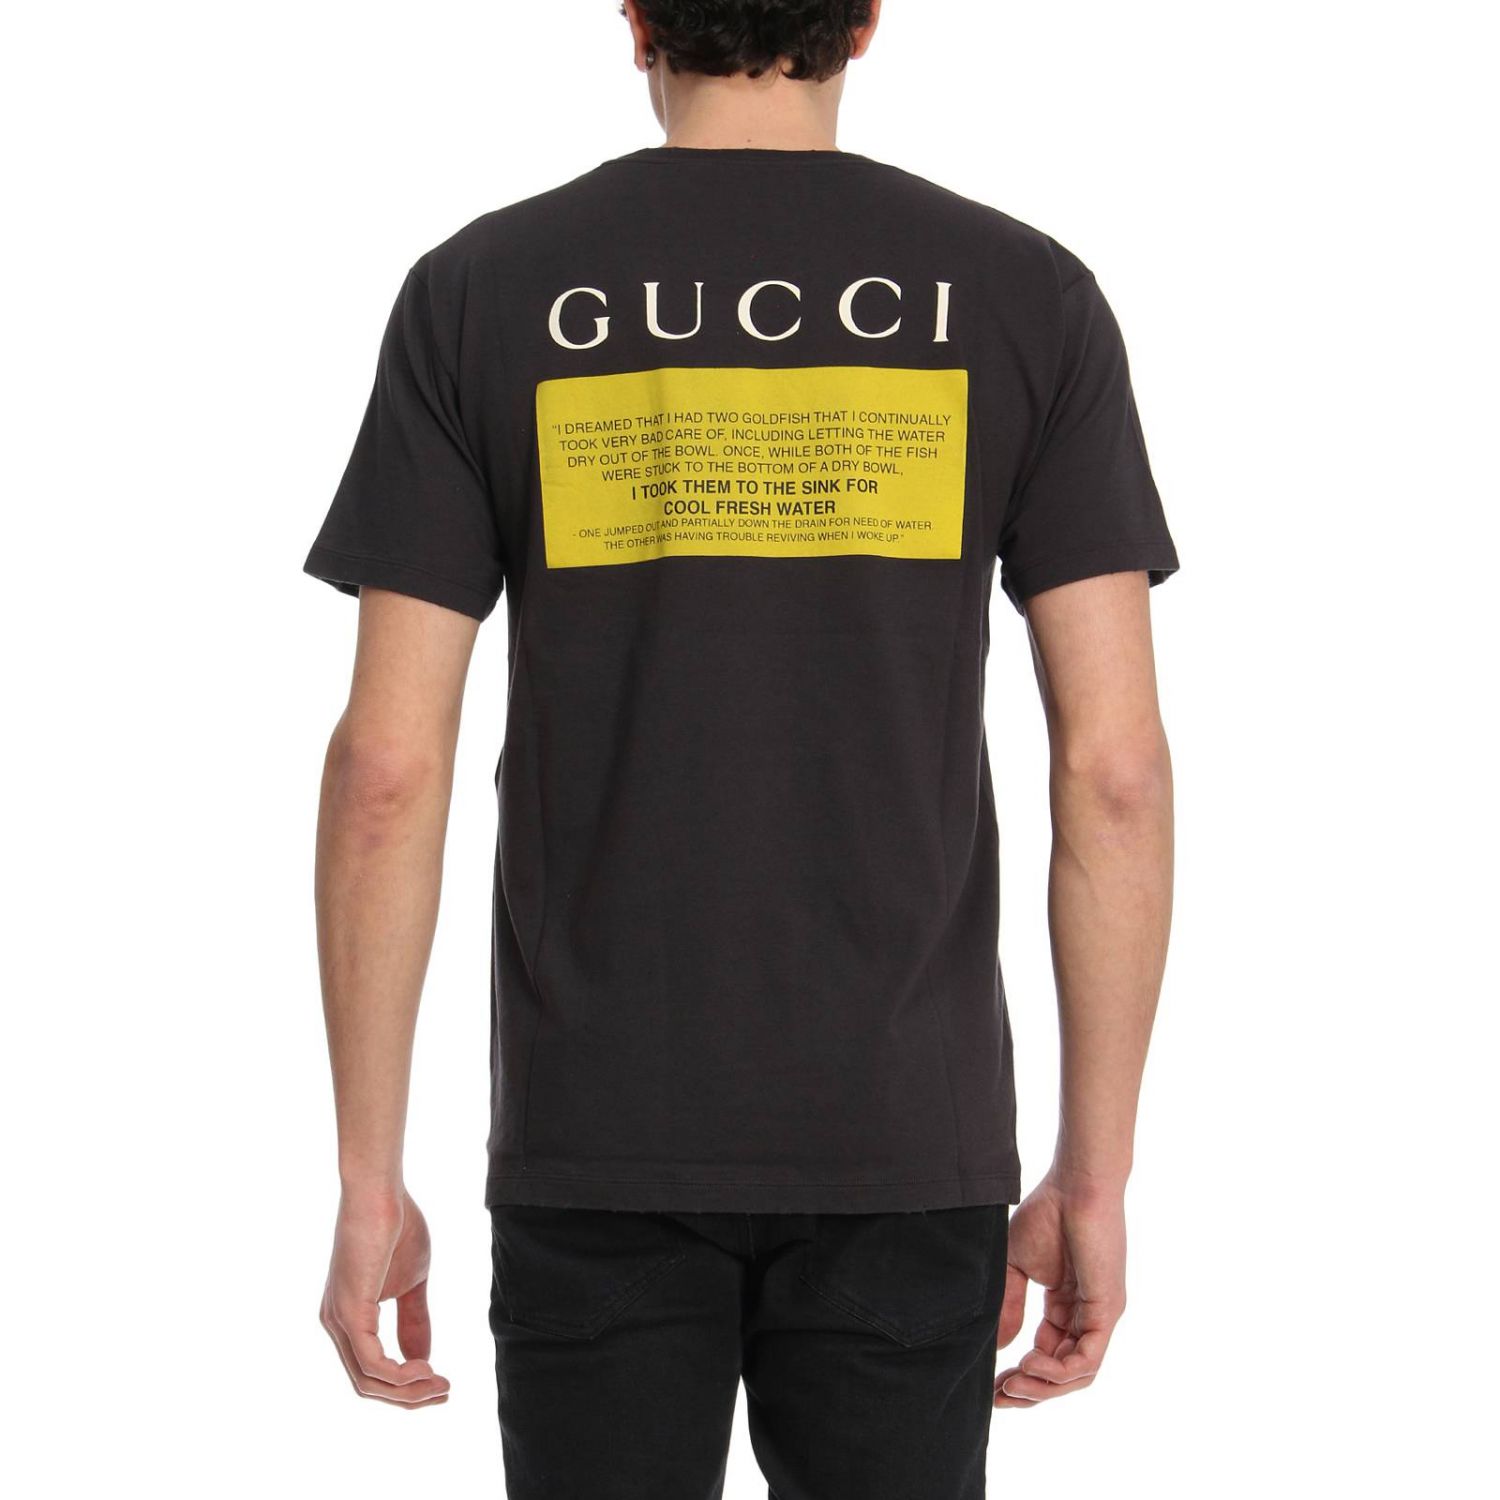 black and gold gucci t shirt